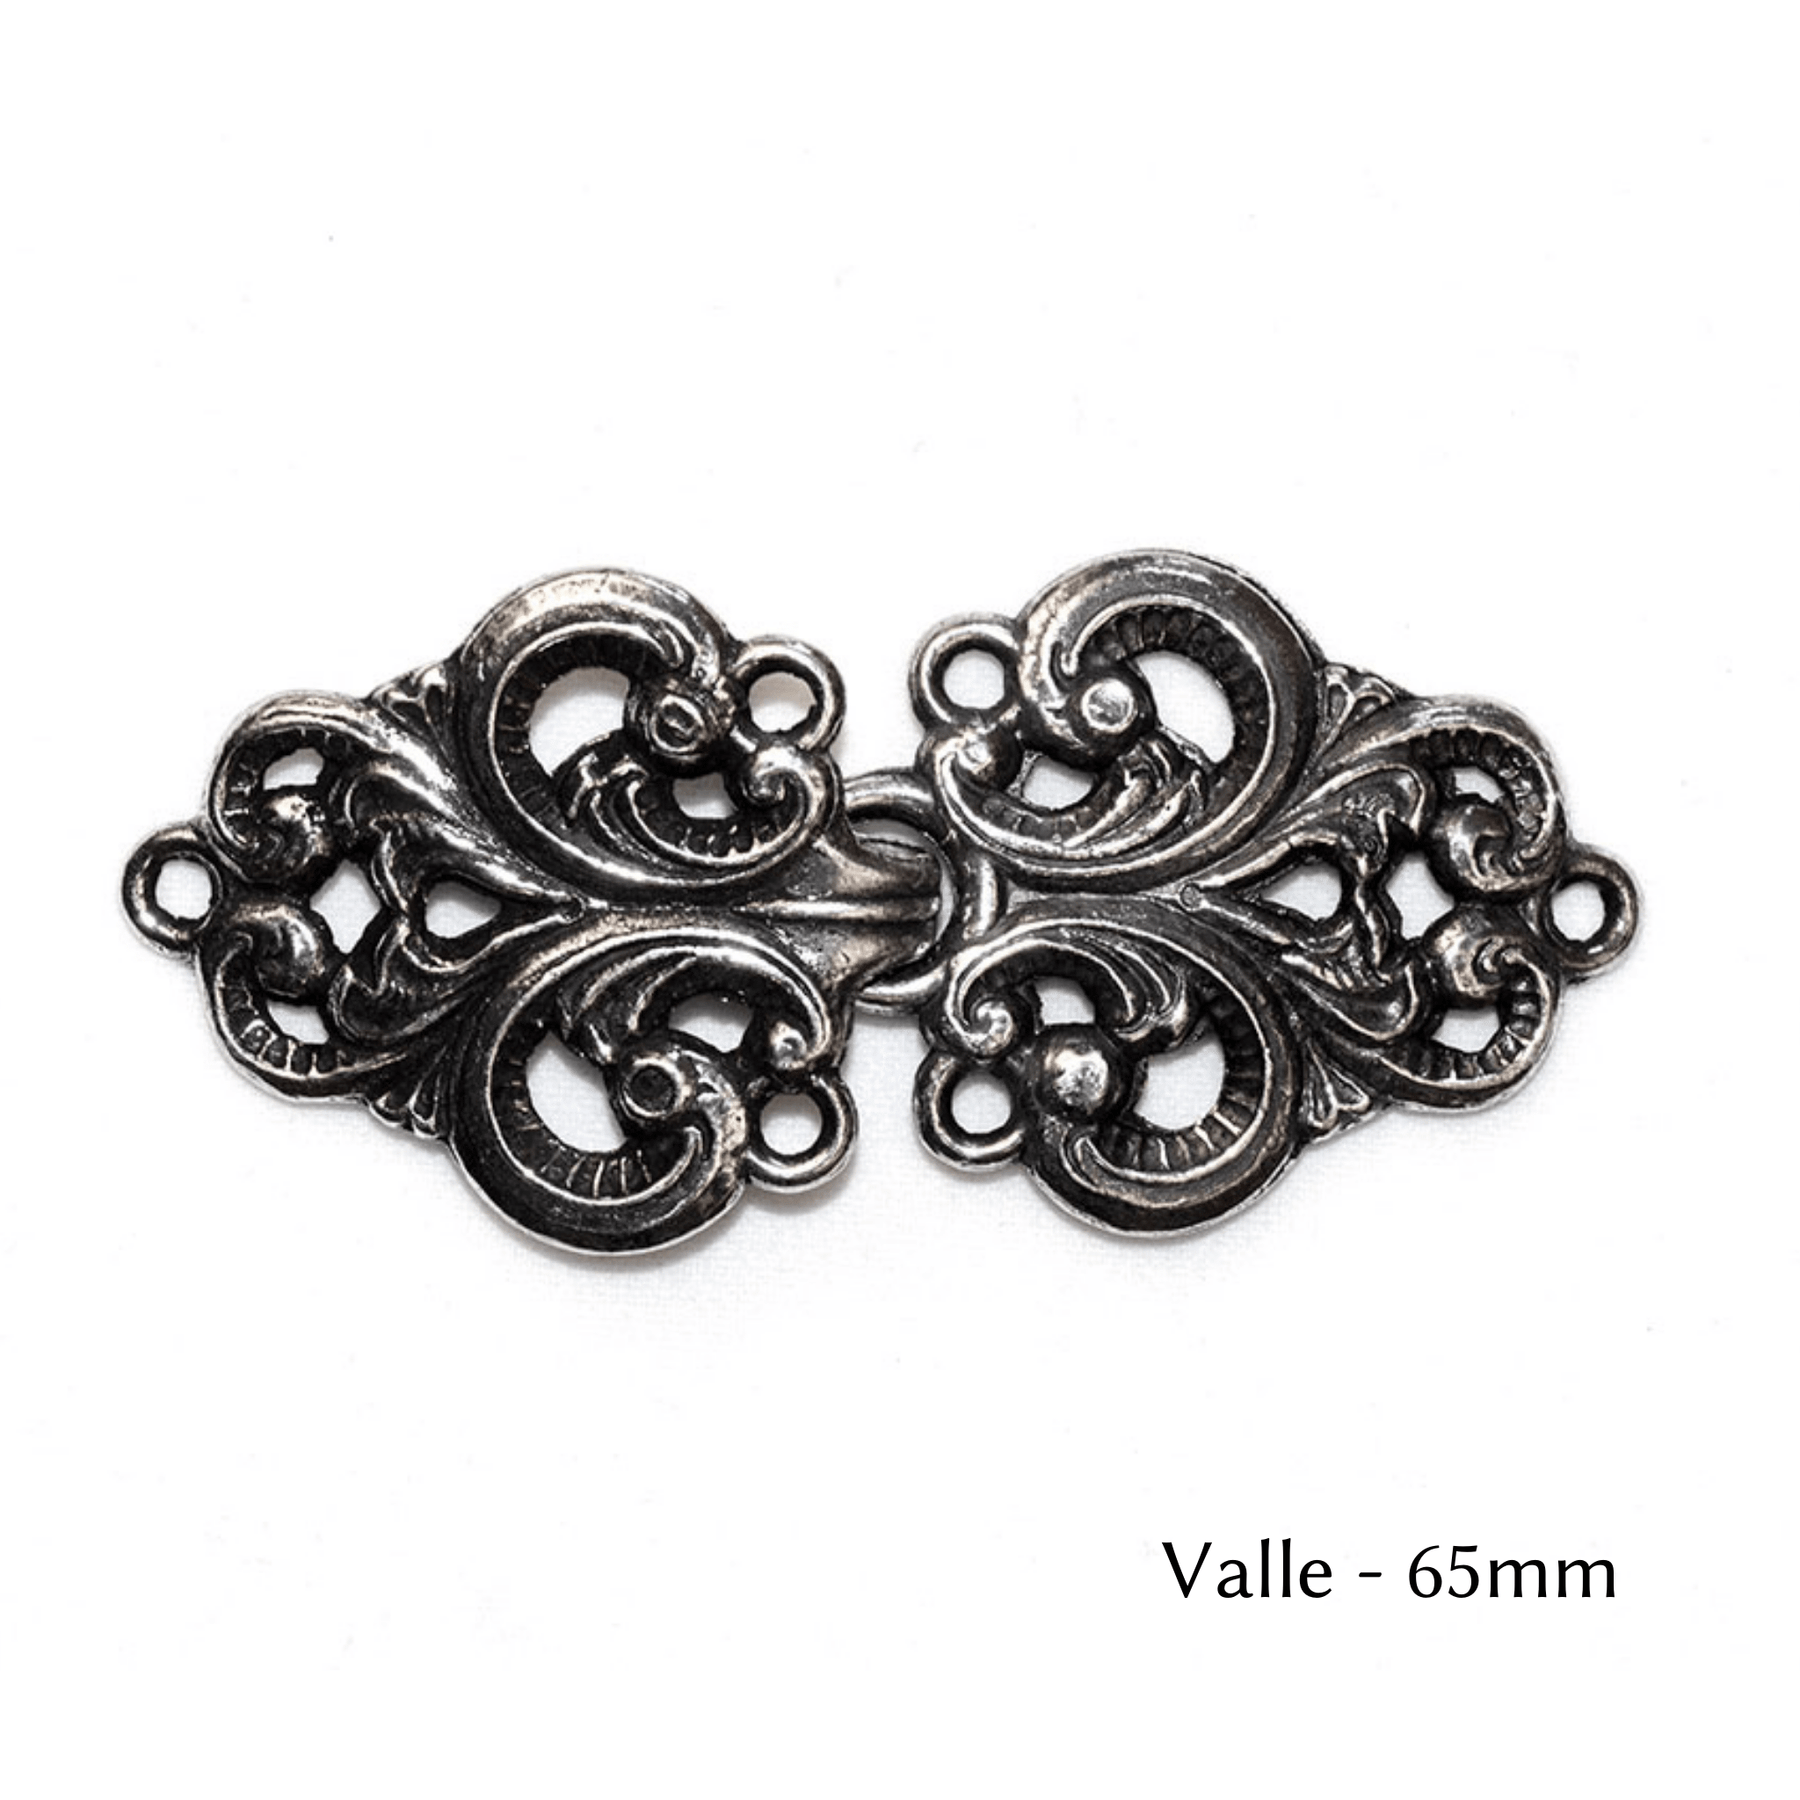 Handmade spiral German silver cardigan clasp or sweater clasp for knit and  fabric - Handmade clasp - Knitting sewing accessory 